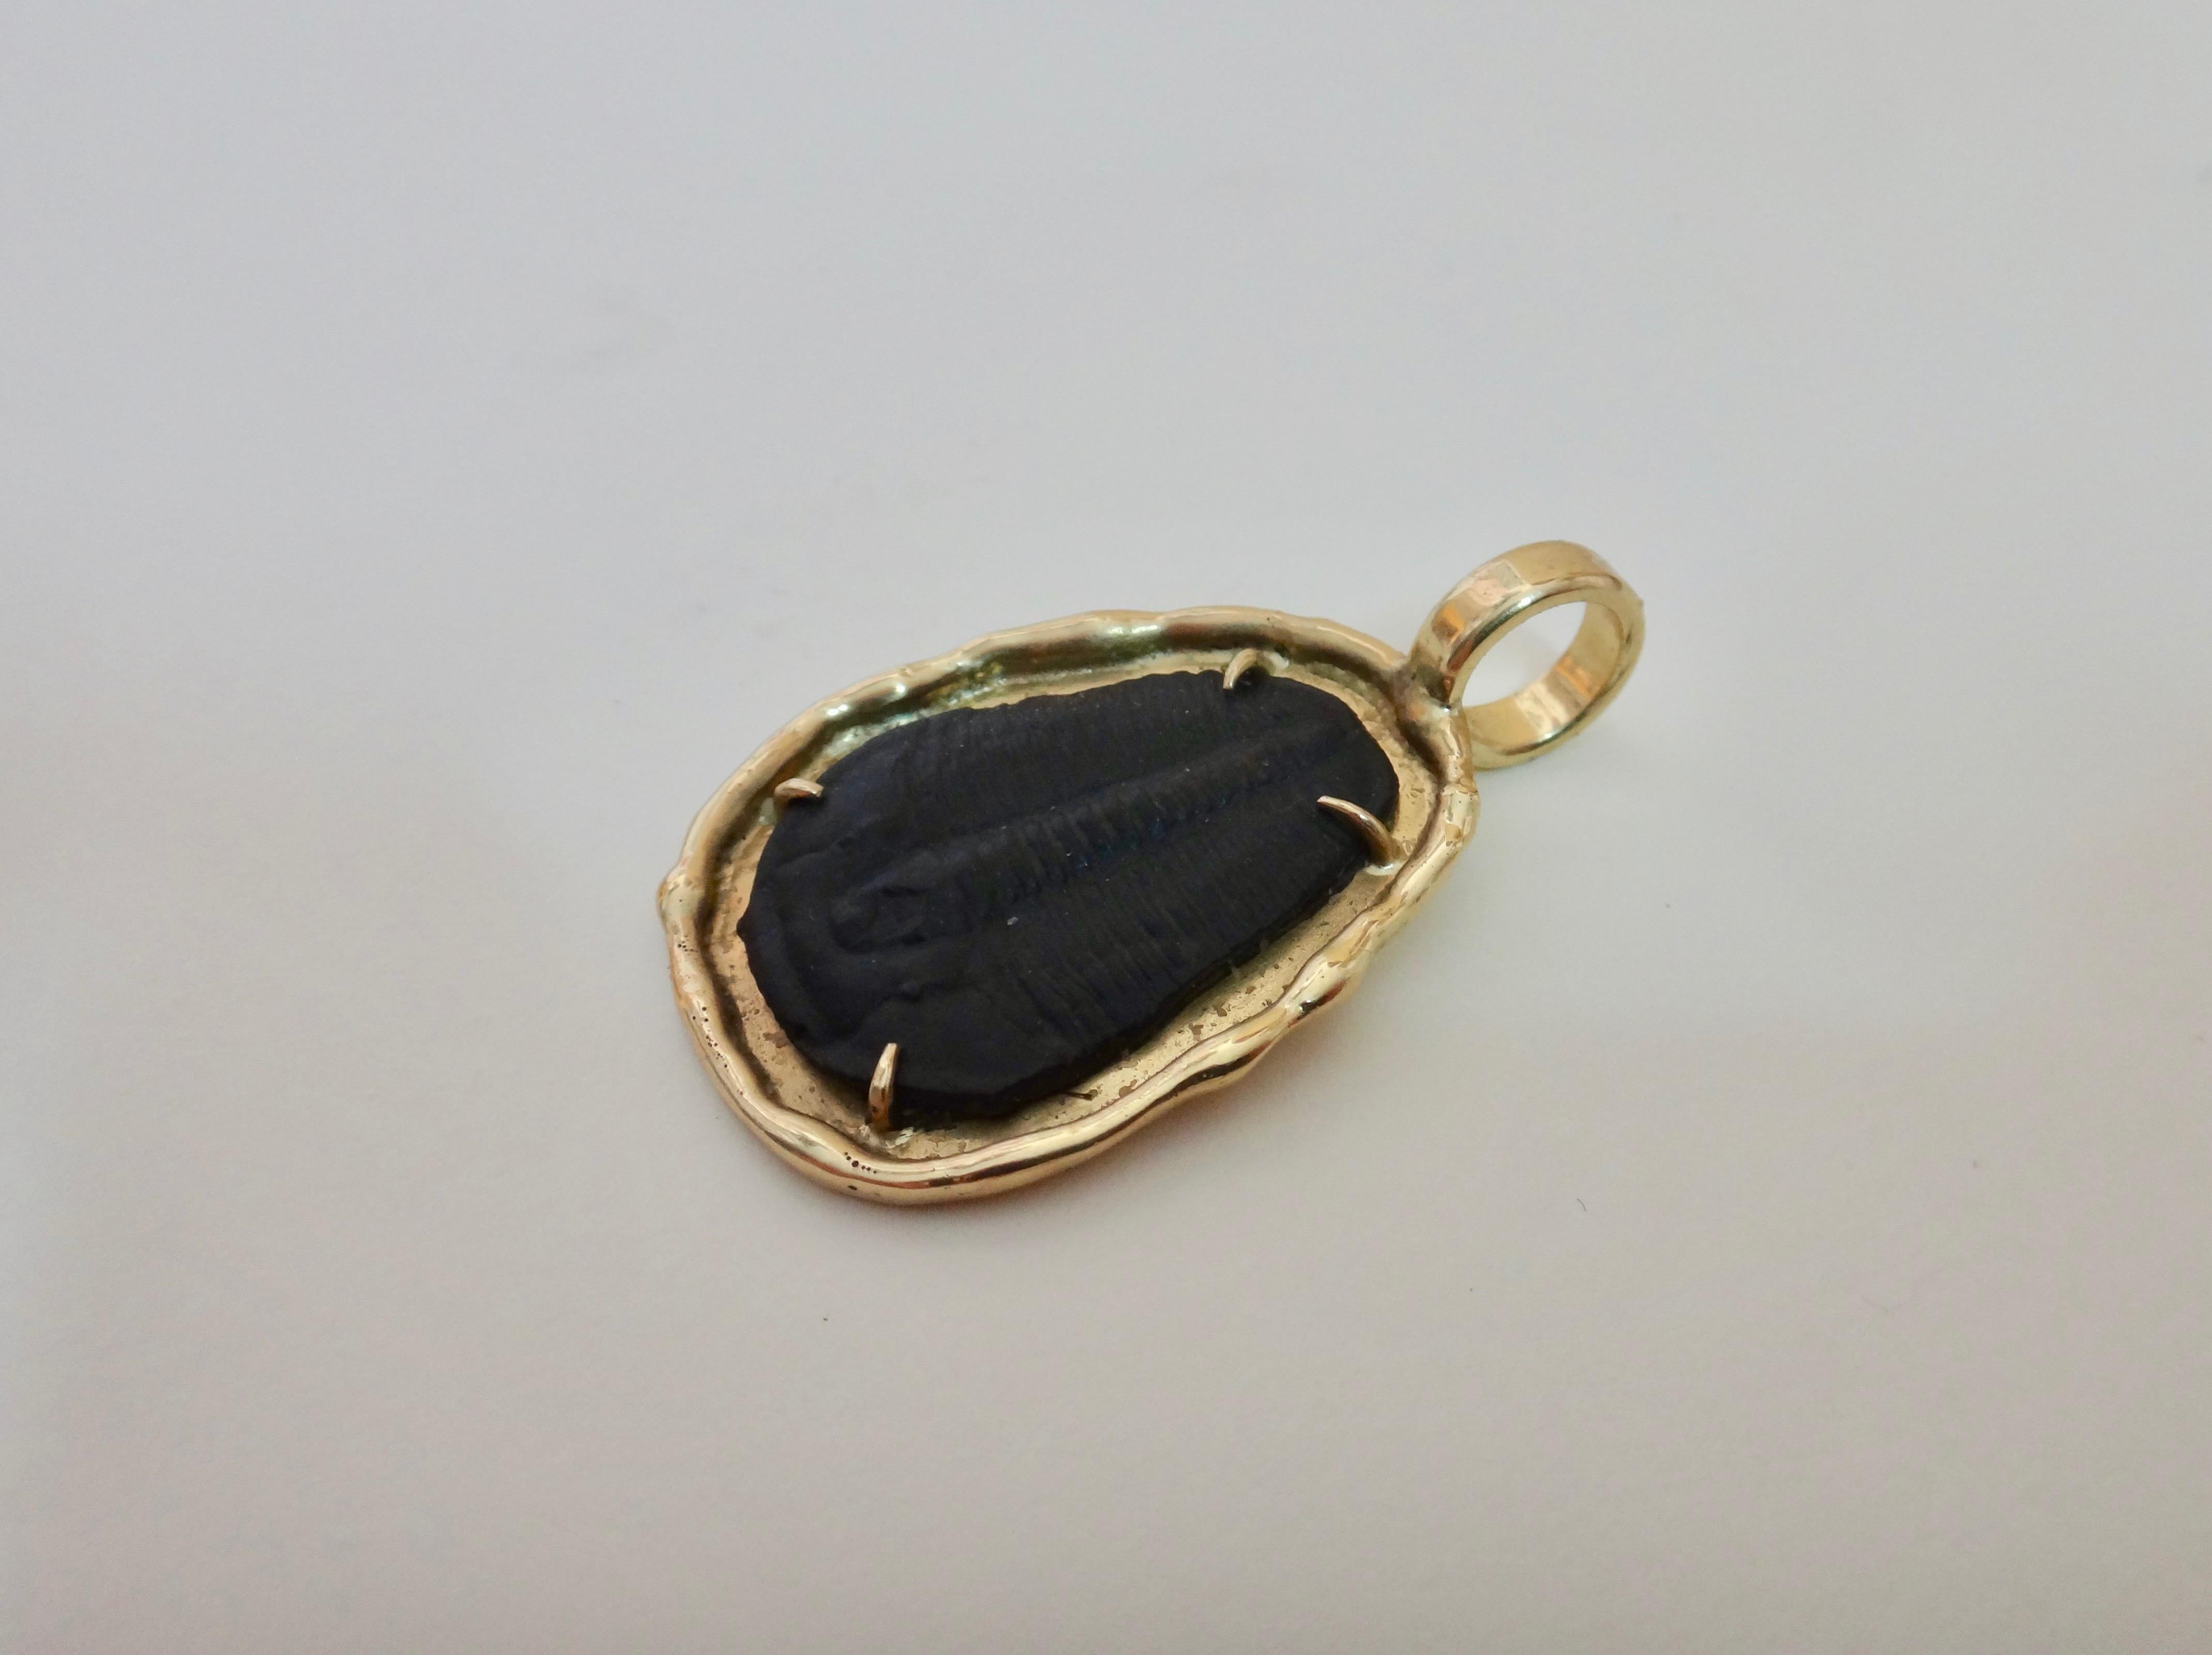 An excellent example of a fossilized trilobite is featured in this one-of-a-kind, 18k yellow gold pendant.  Trilobites are a group of extinct archnomorph arthropods that form the class Trilbita.  Trilobites are one of the earliest-known groups of